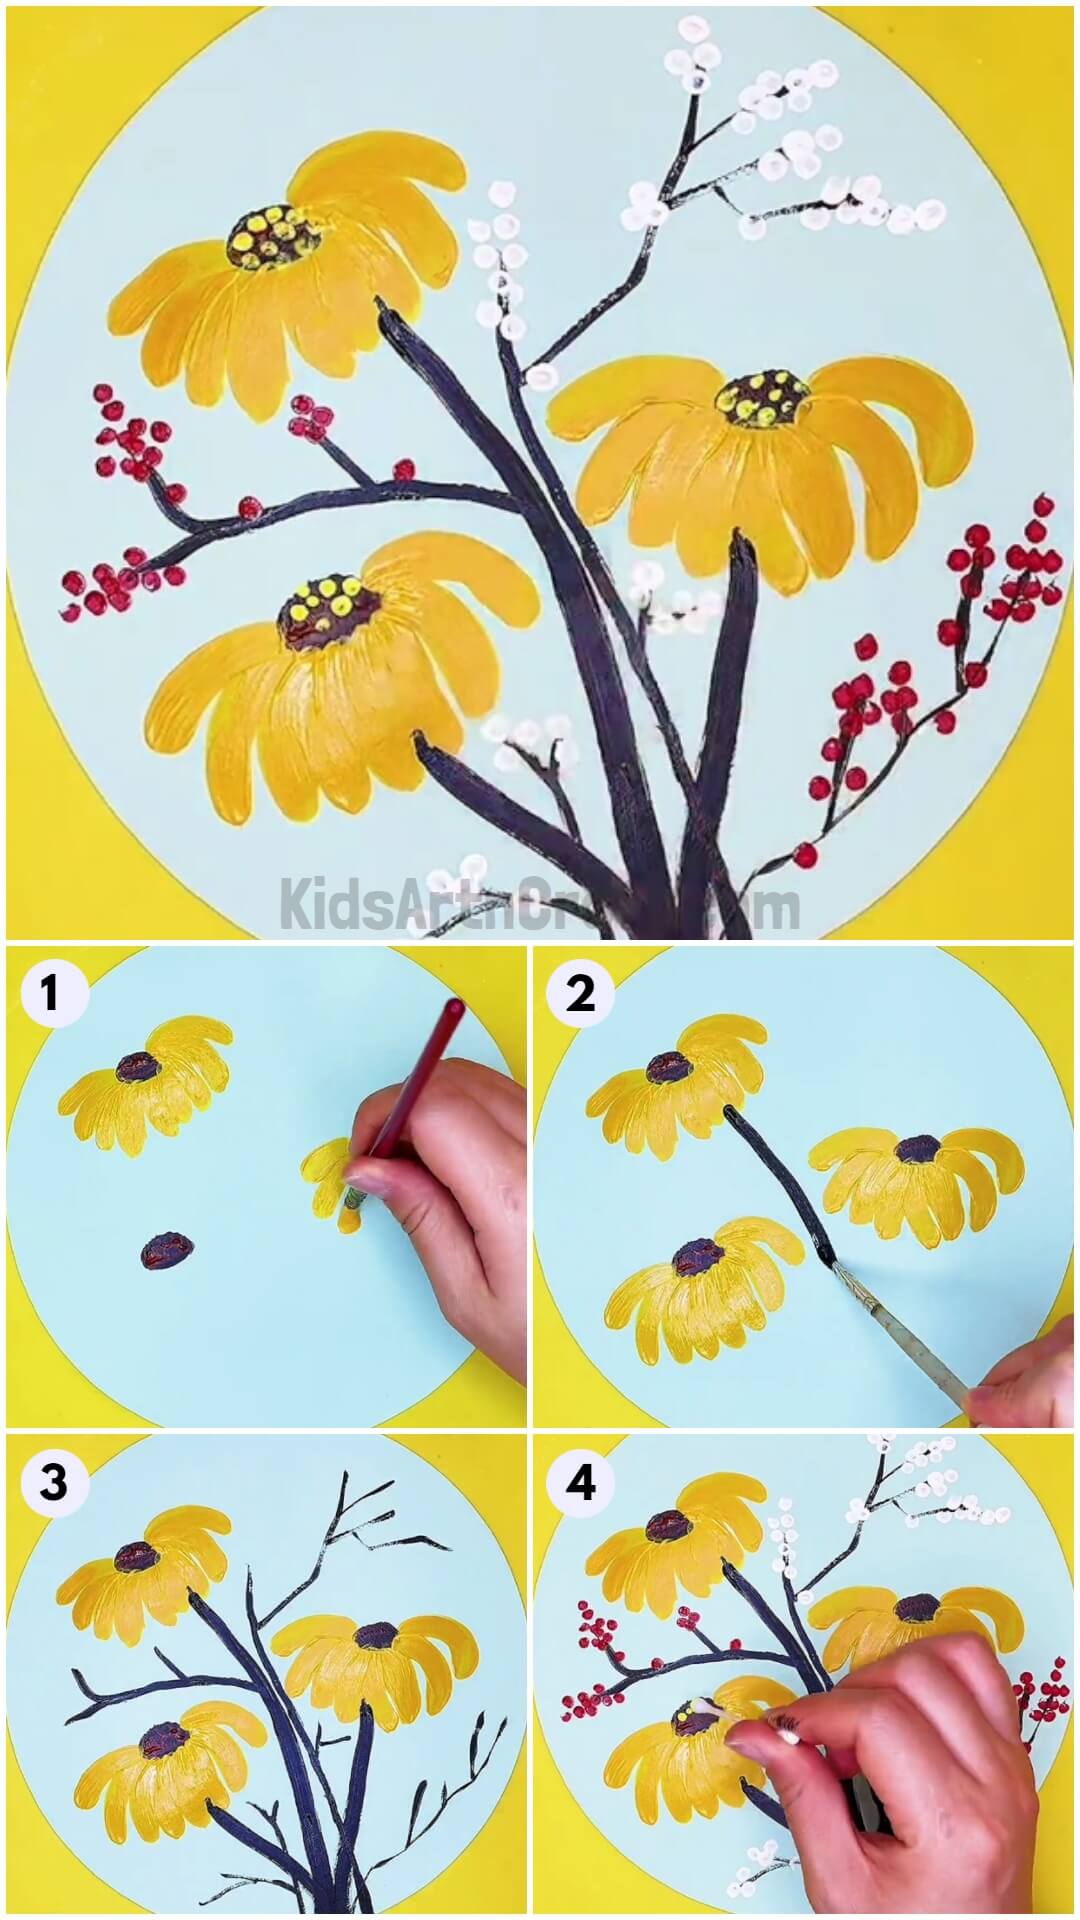  Sunflower Garden Painting Step by Step Tutorial